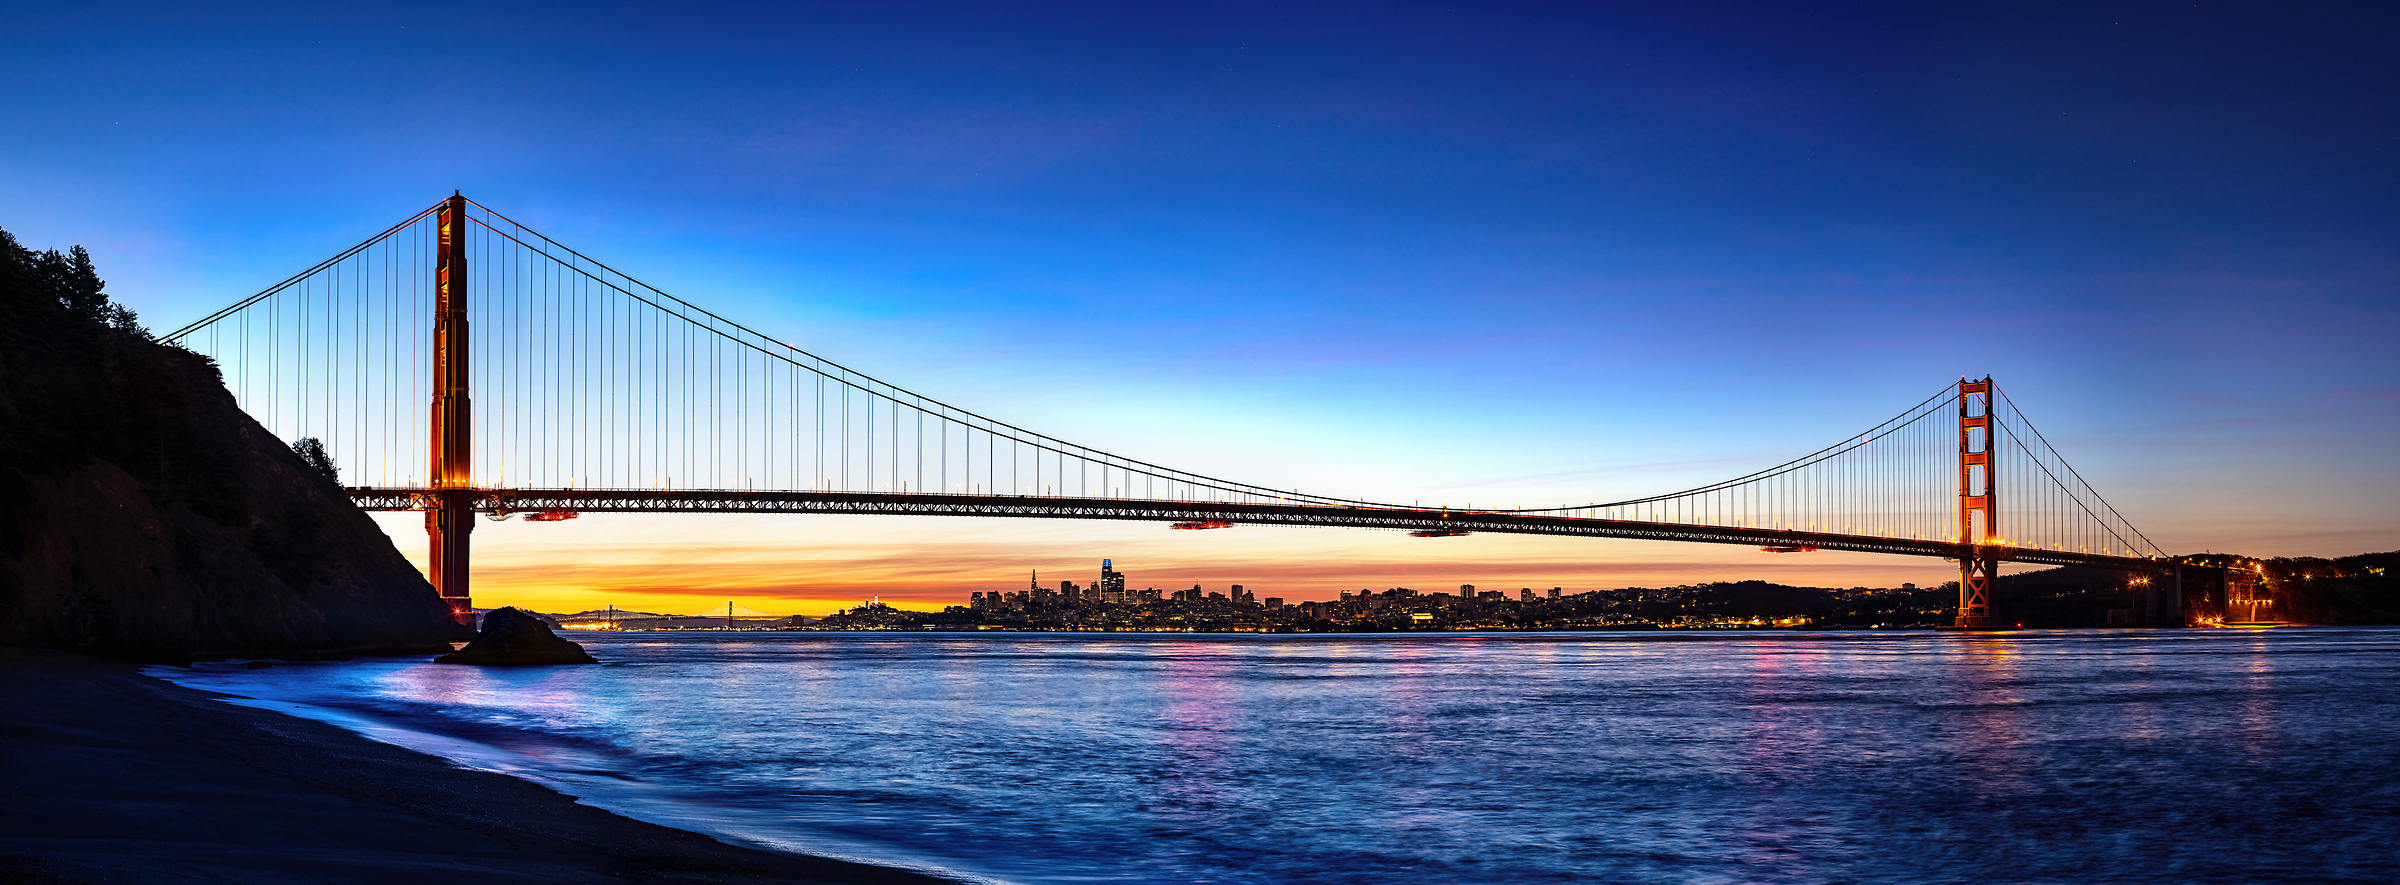 271 megapixels! A very high resolution, large-format VAST photo print of the Golden Gate Bridge at sunset; panorama photograph created by Nicholas Gonzales in Kirby Cove, Mill Valley, California.